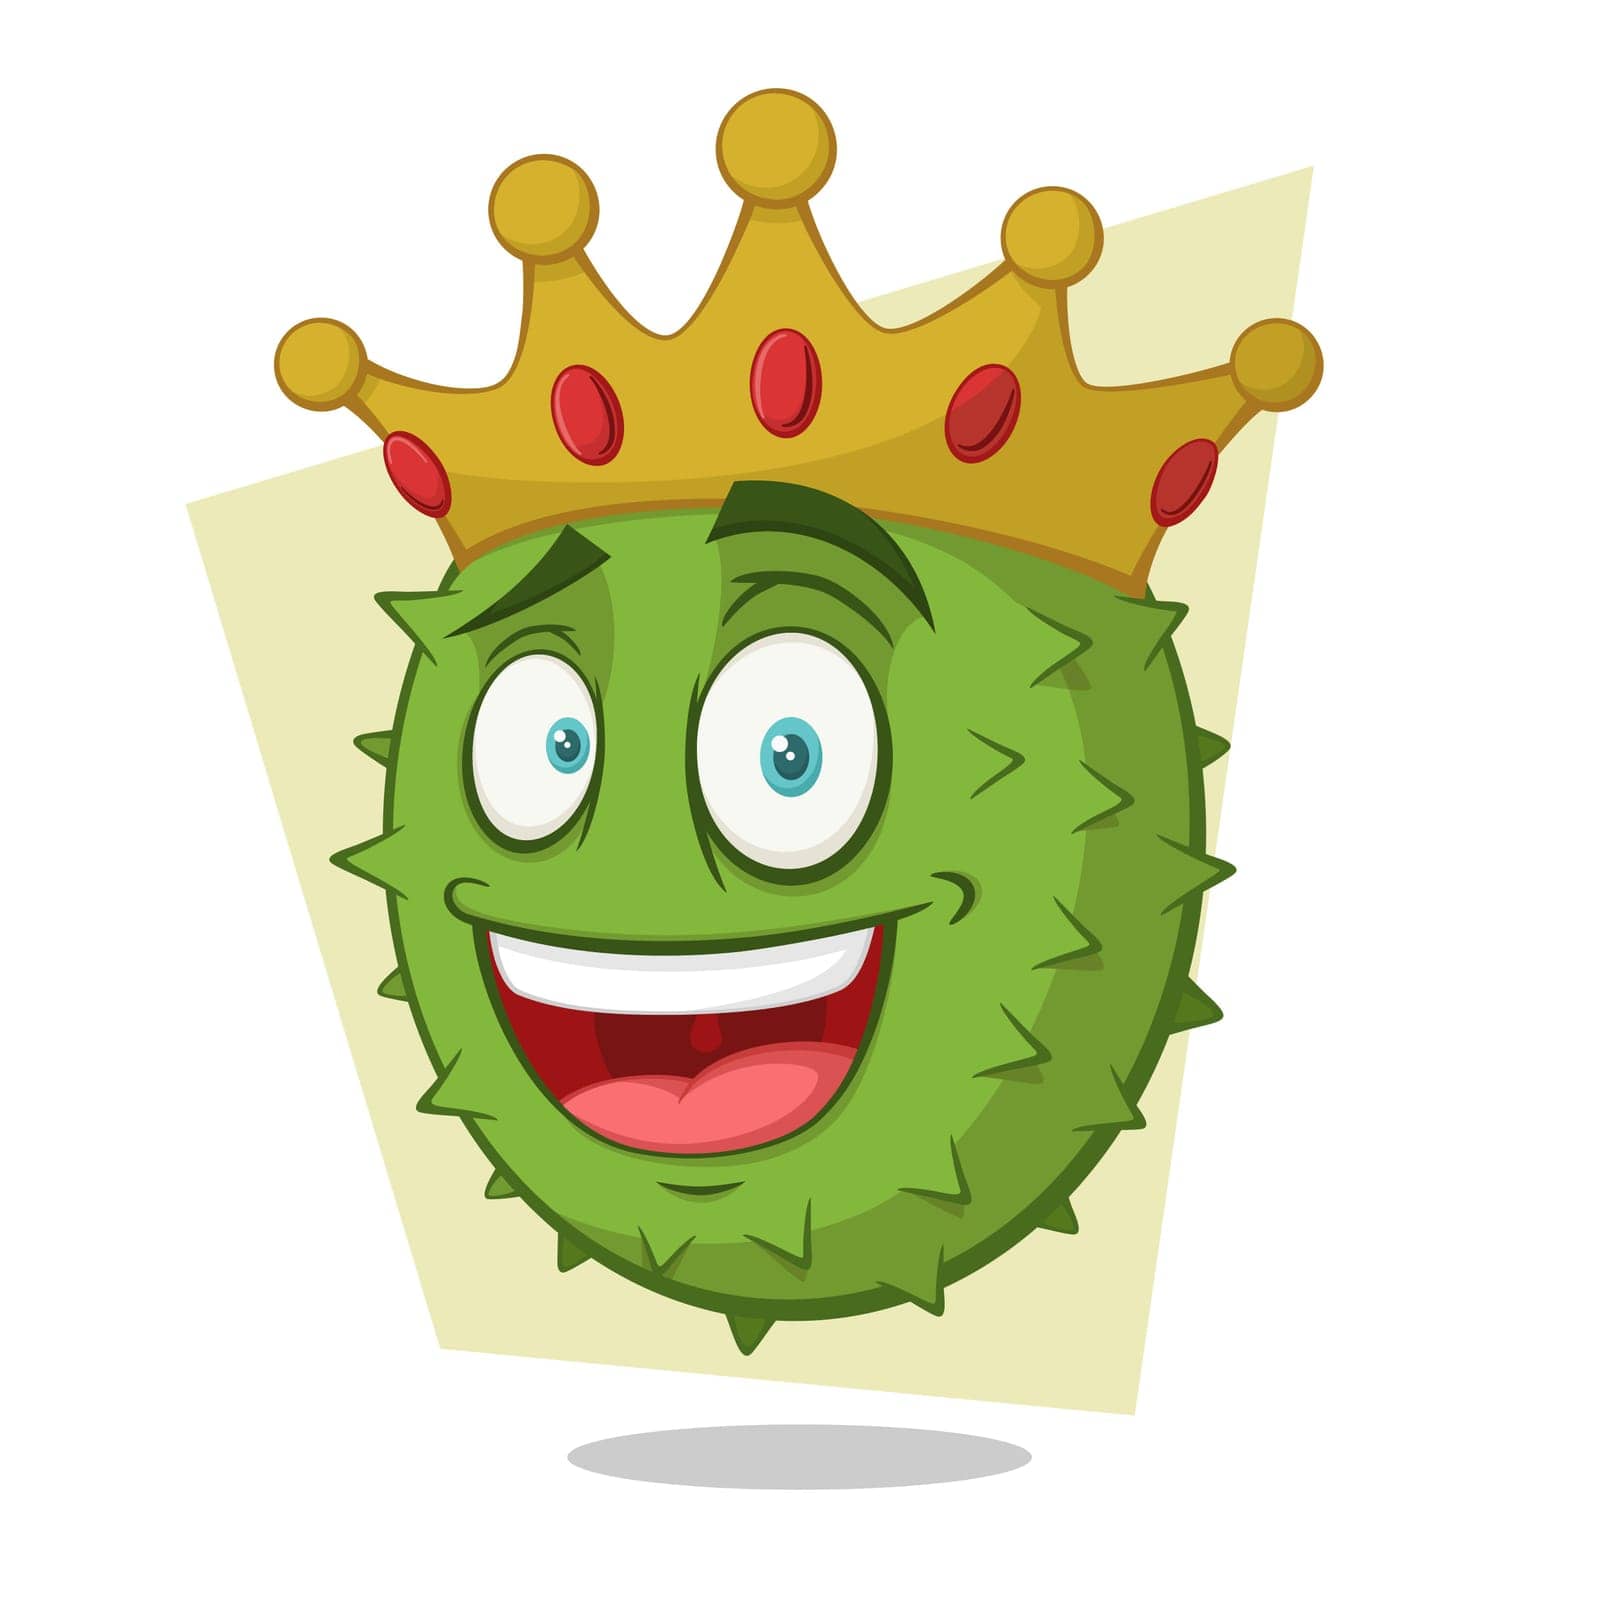 Durian King Cartoon Character With Crown by JuneYap